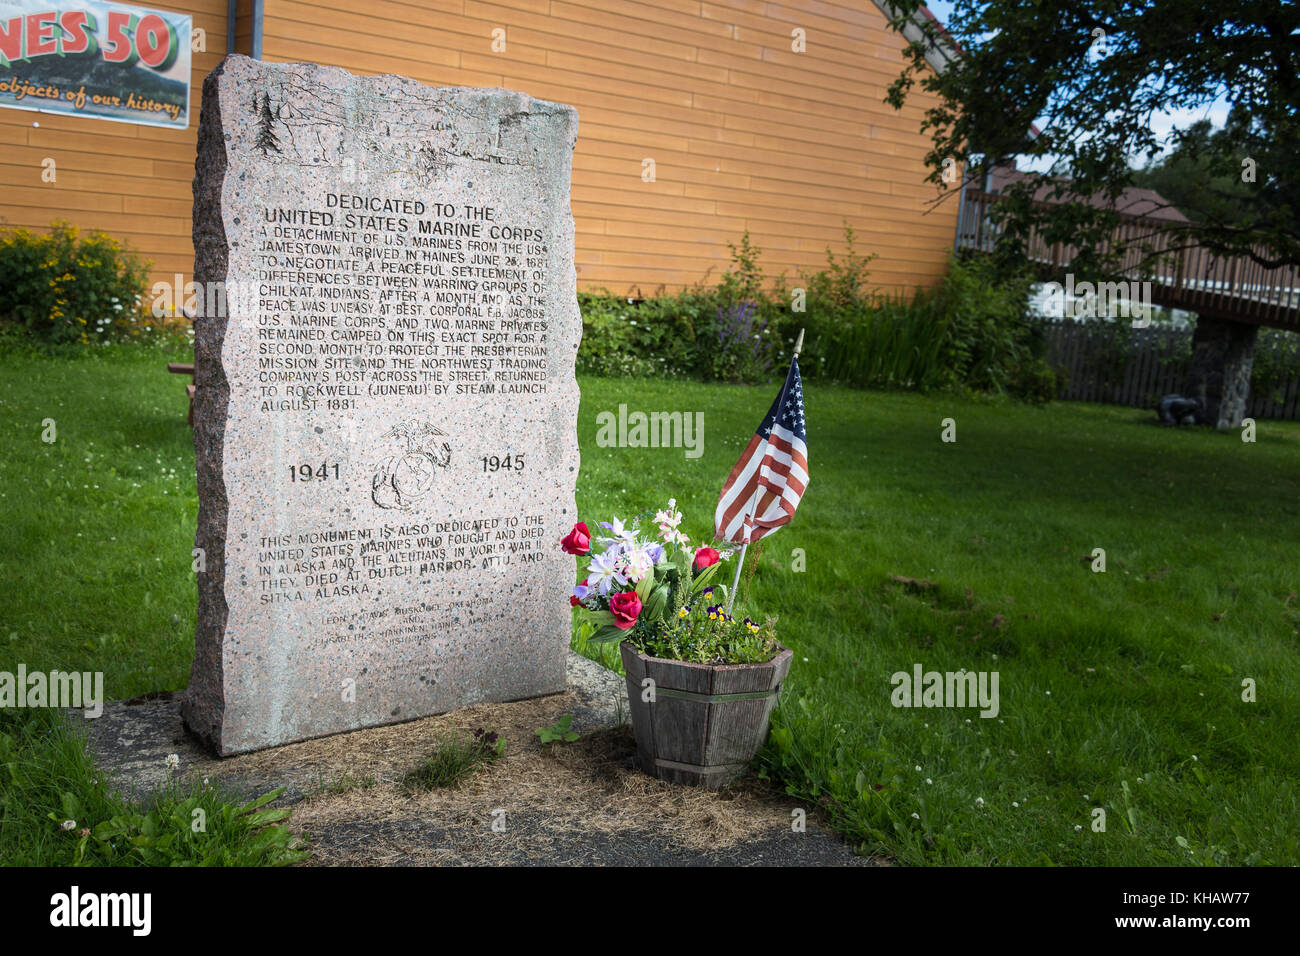 Haines, Alaska, USA - July 29th, 2017: Monument dedicated to the Marine corps who arrived in Haines in 1881 and also the Marines who died in Alaska in Stock Photo